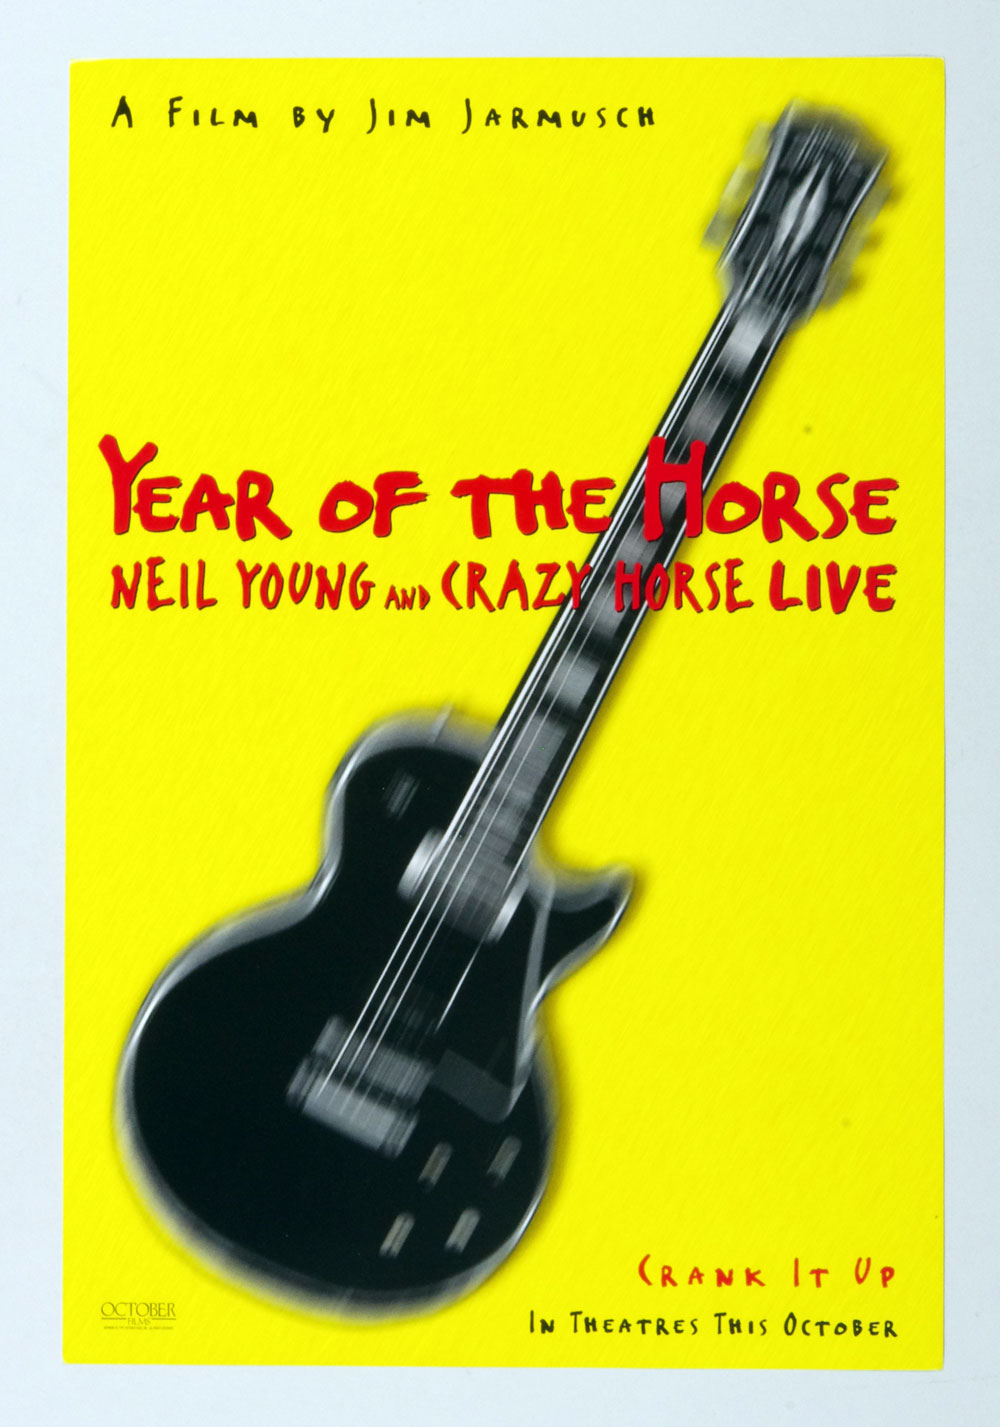 Concert　Horse　Ticketstbus　Neil　of　Young　Year　Promotion　Vintage　Poster　Collectibles　the　Poster　Film　1977　Handbills